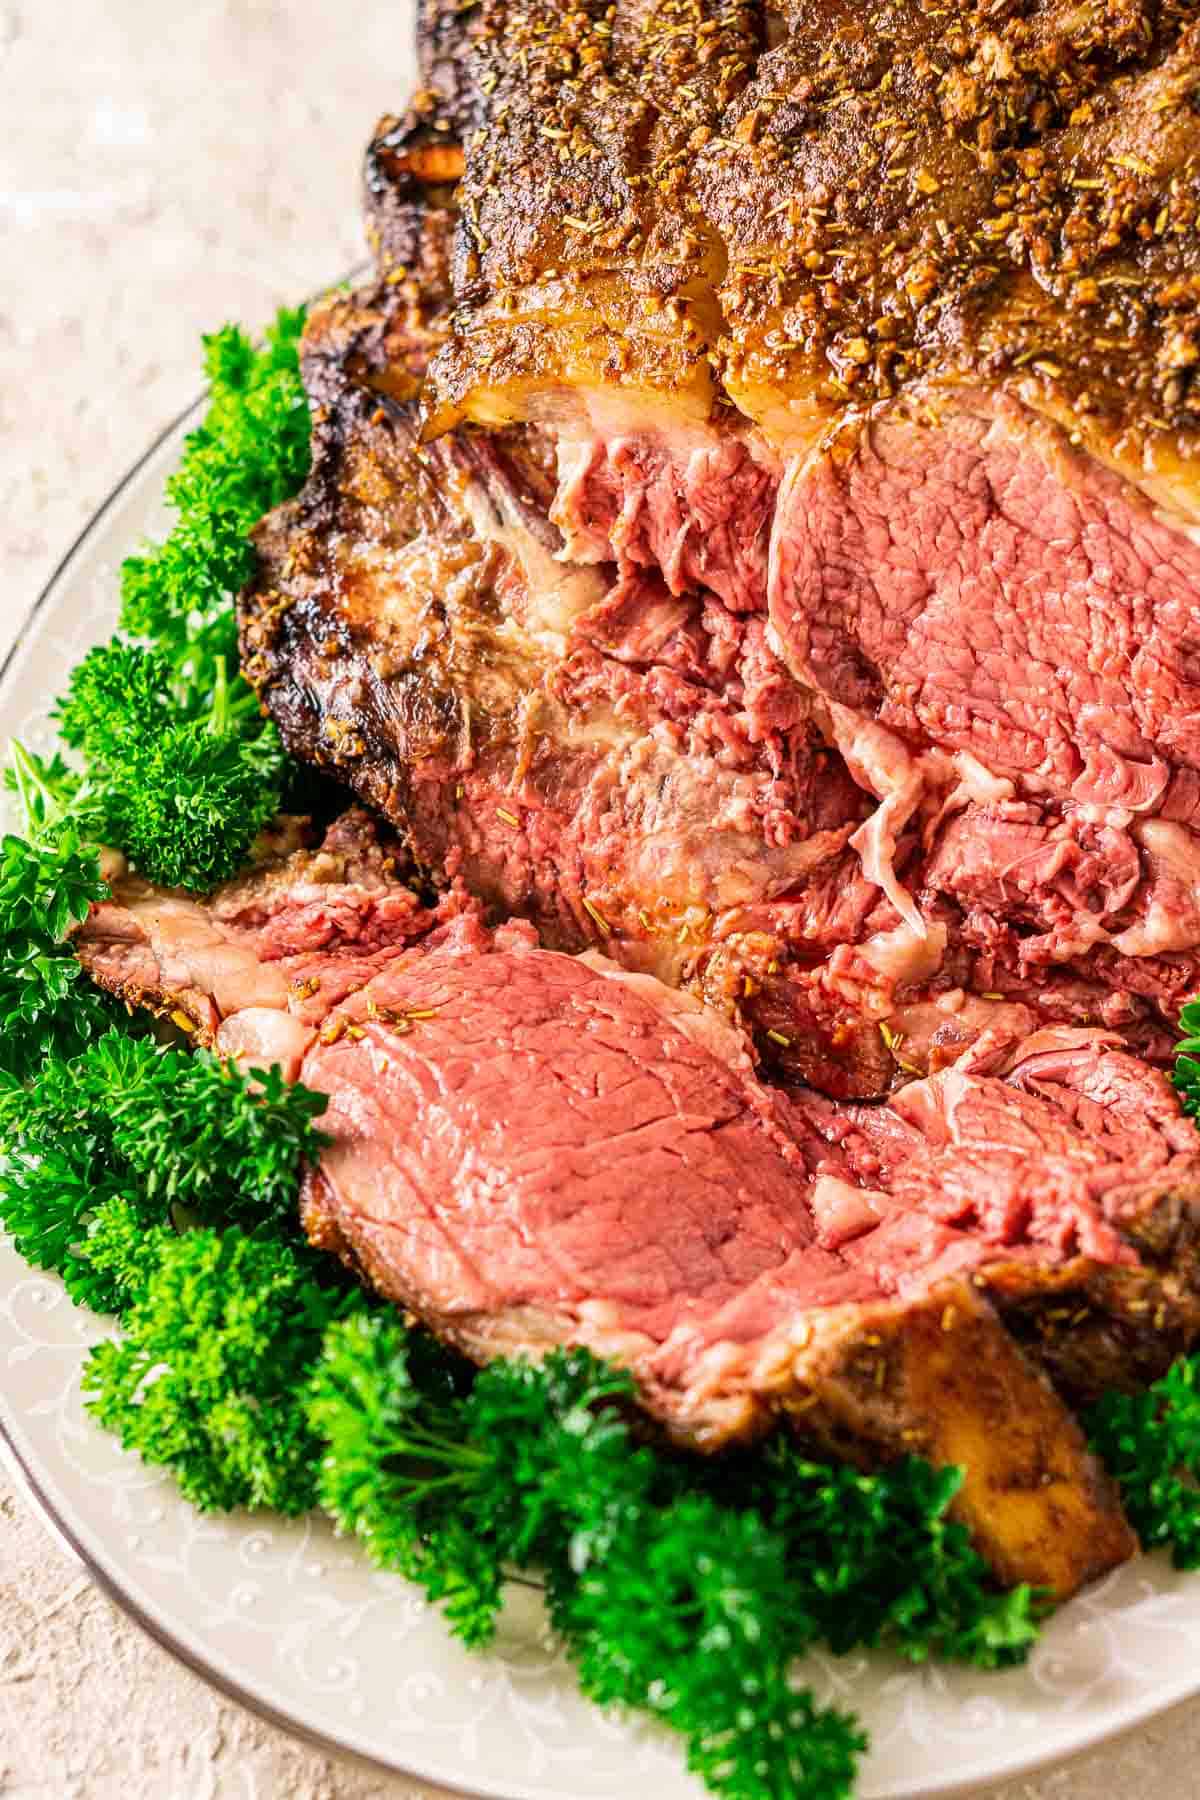 Looking down on the smoked prime rib roast on a cream-colored platter with green parsley around it.